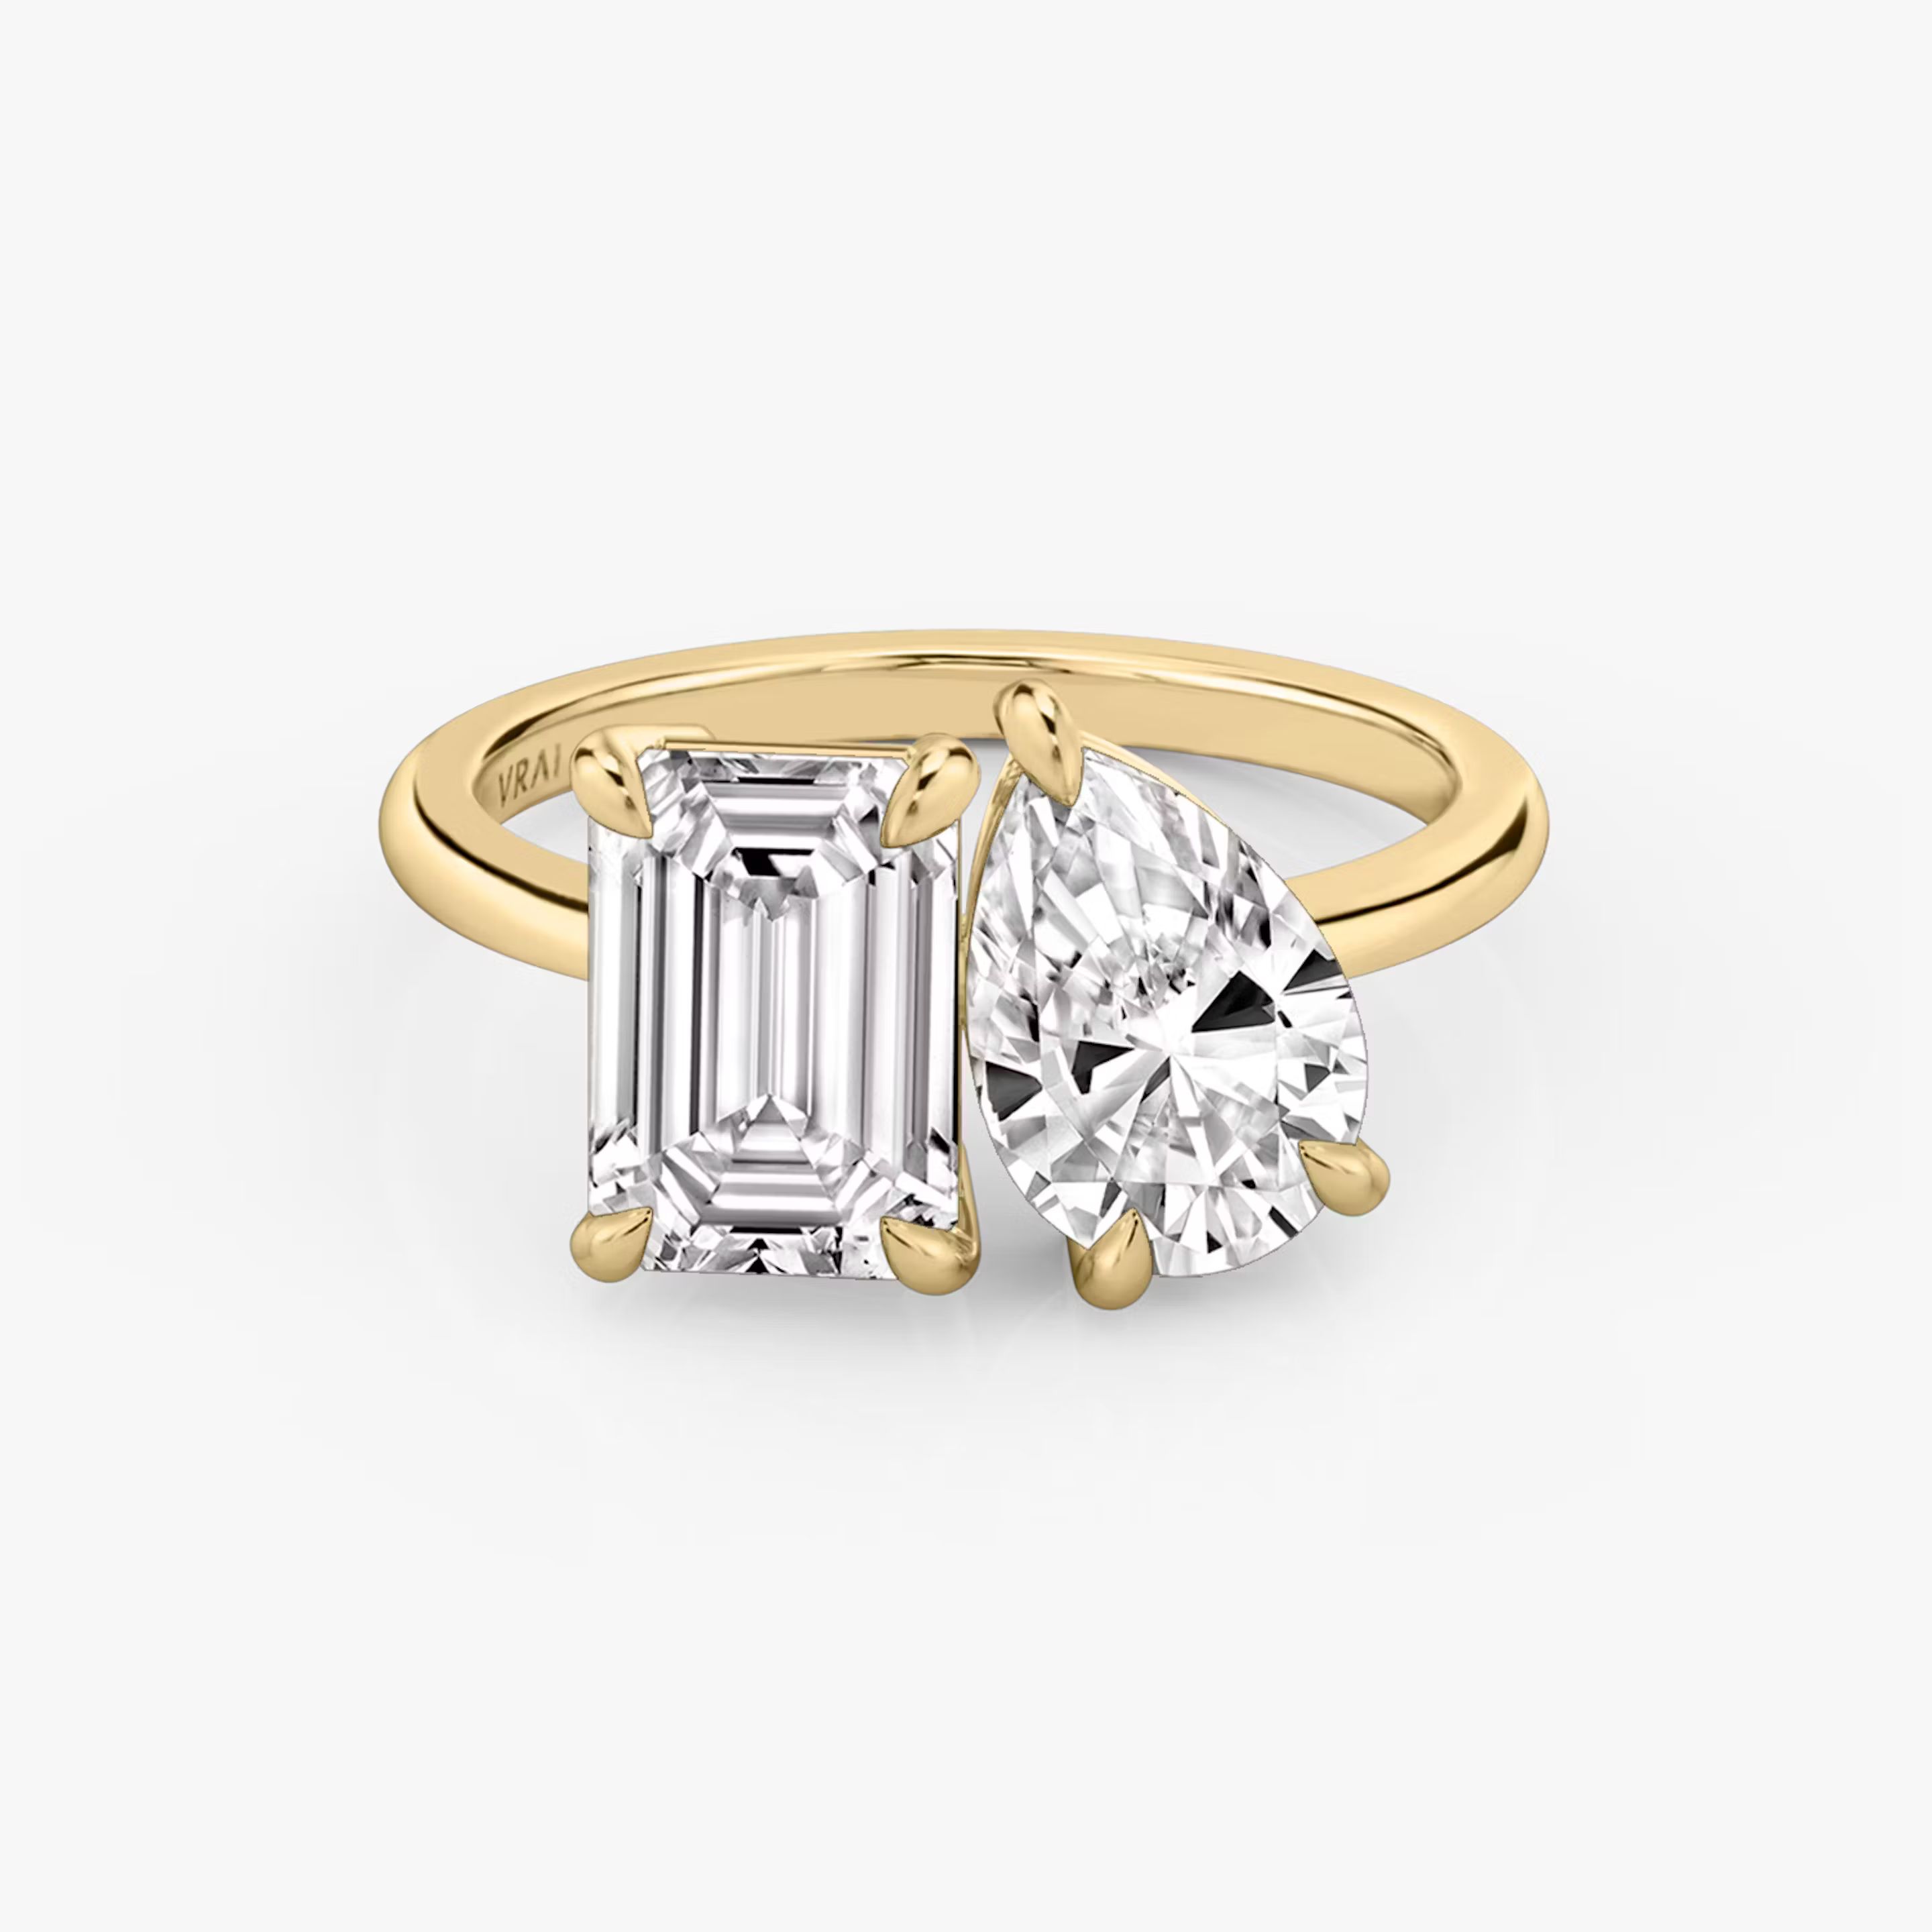 The Toi et Moi Emerald and Pear Engagement Ring | Vrai and Oro